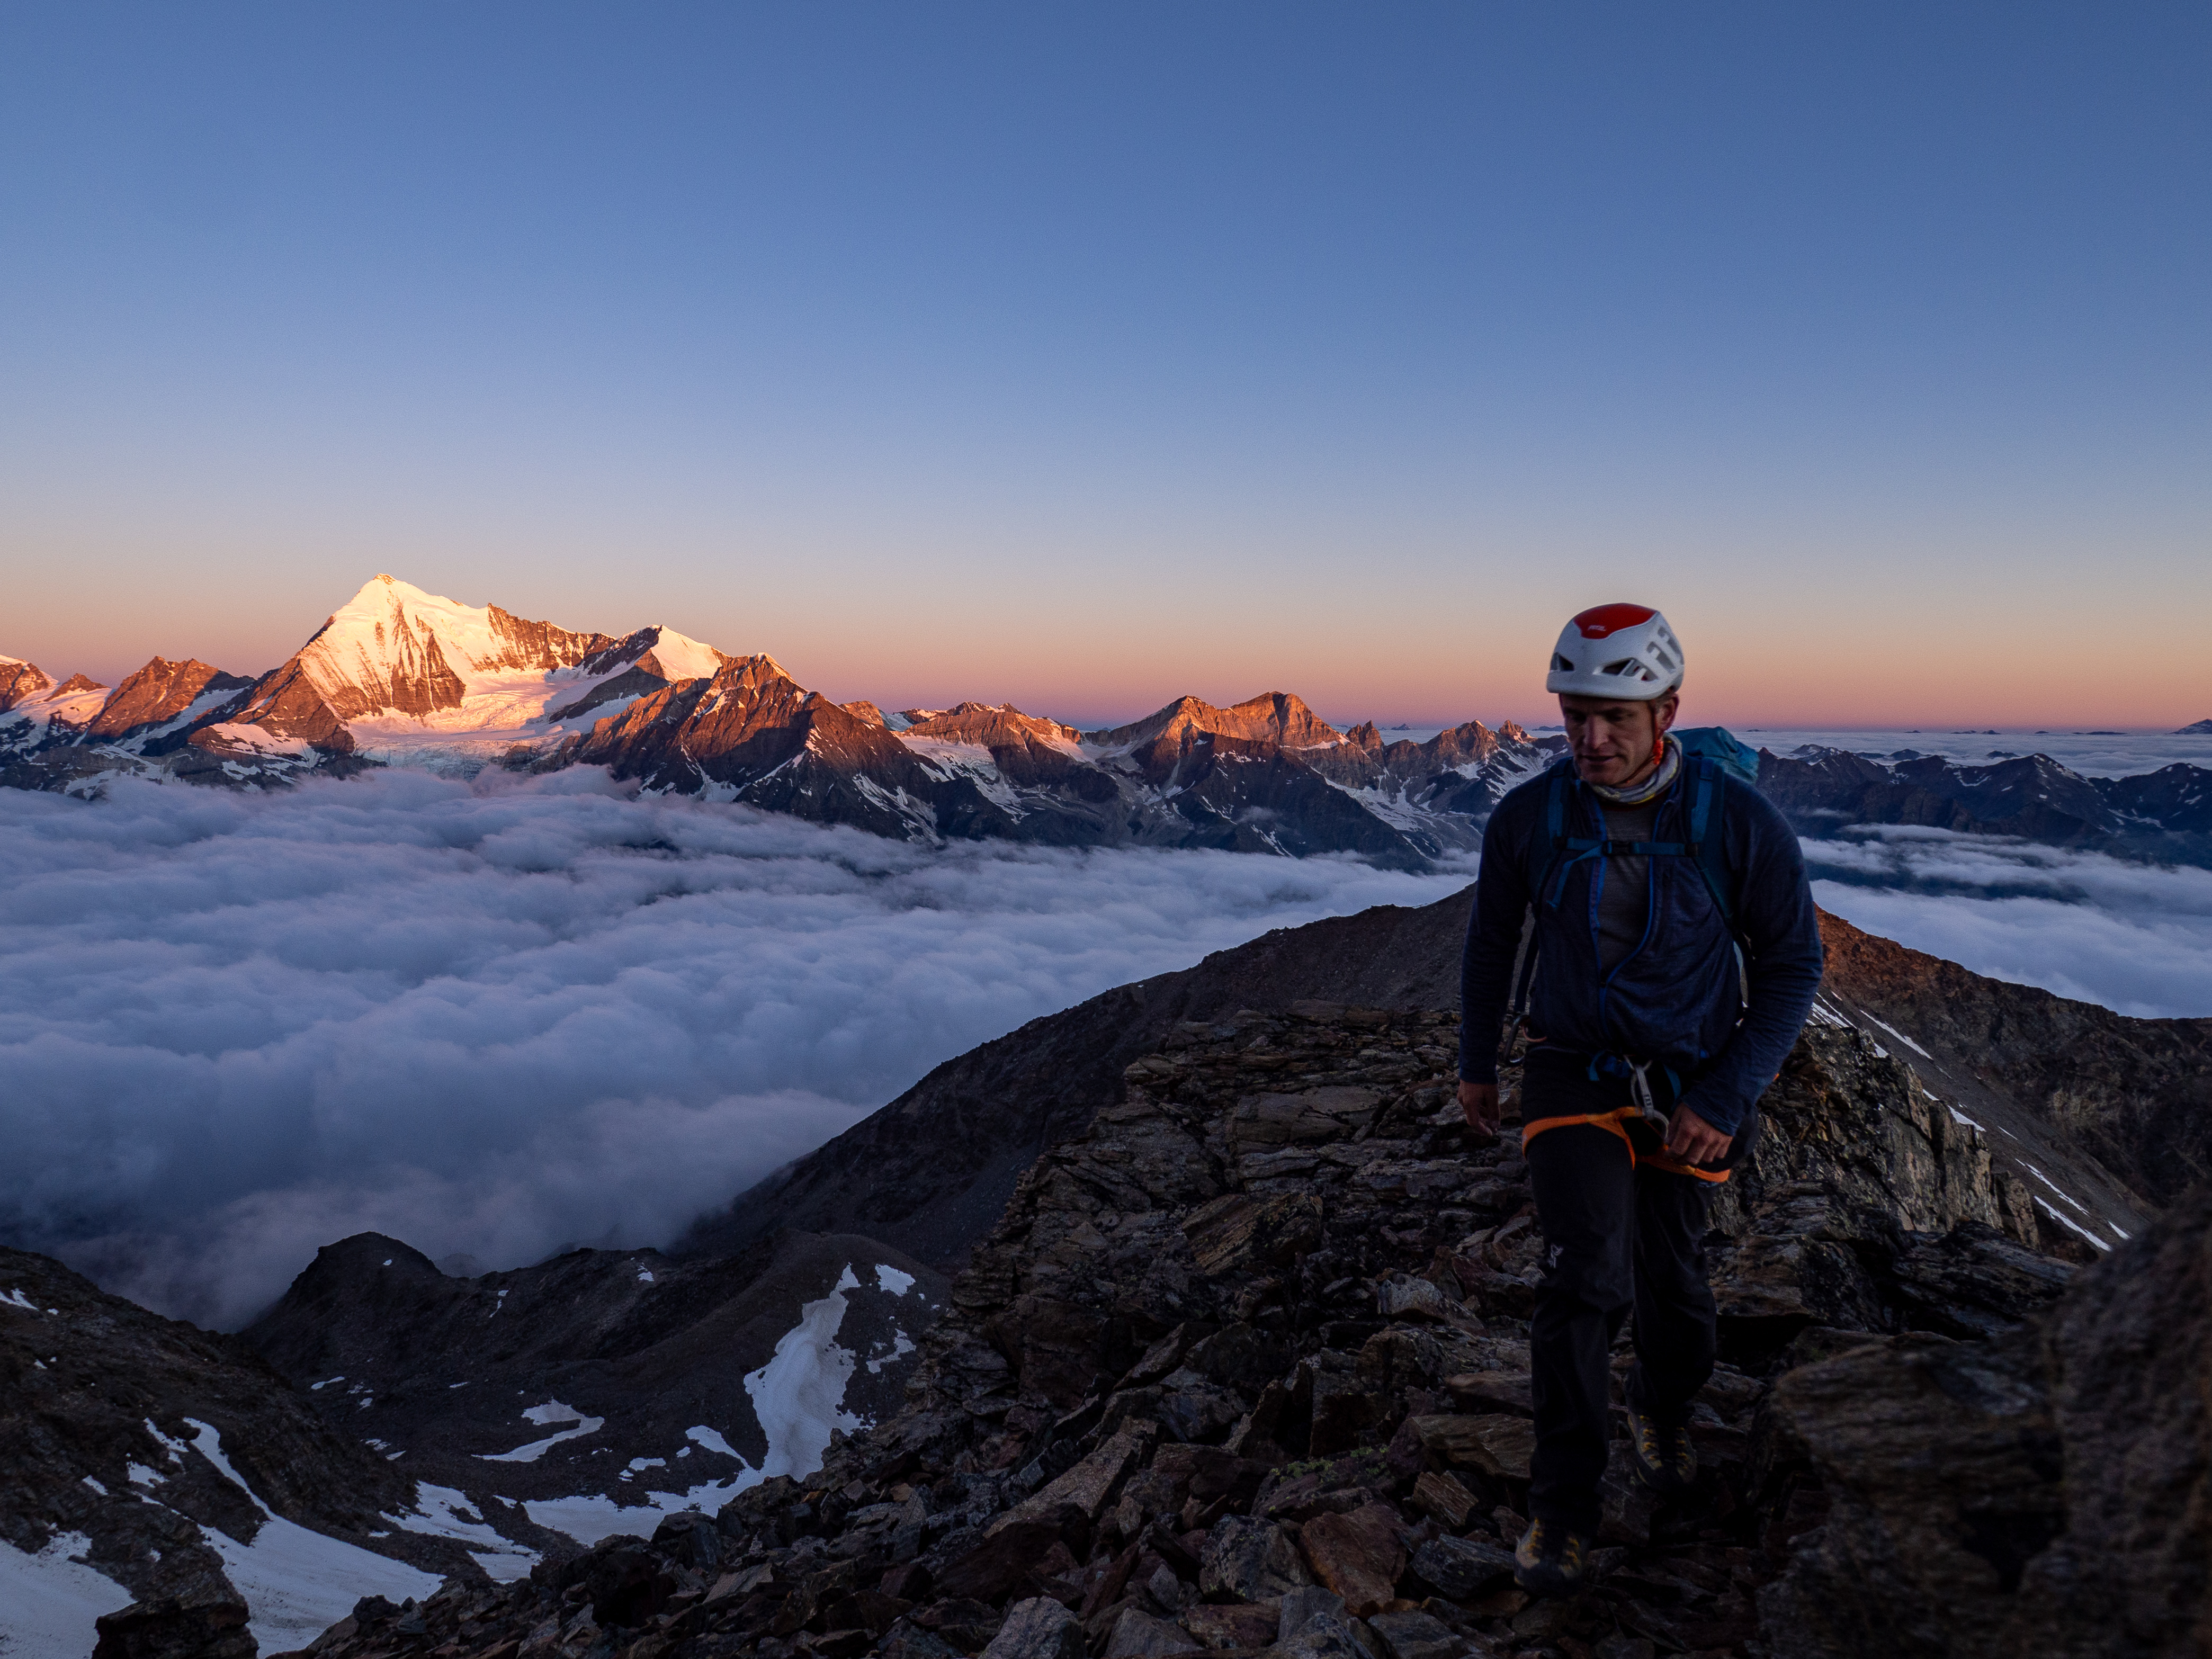 Sunrise on the Nadelgrat with the Weisshorn in the background